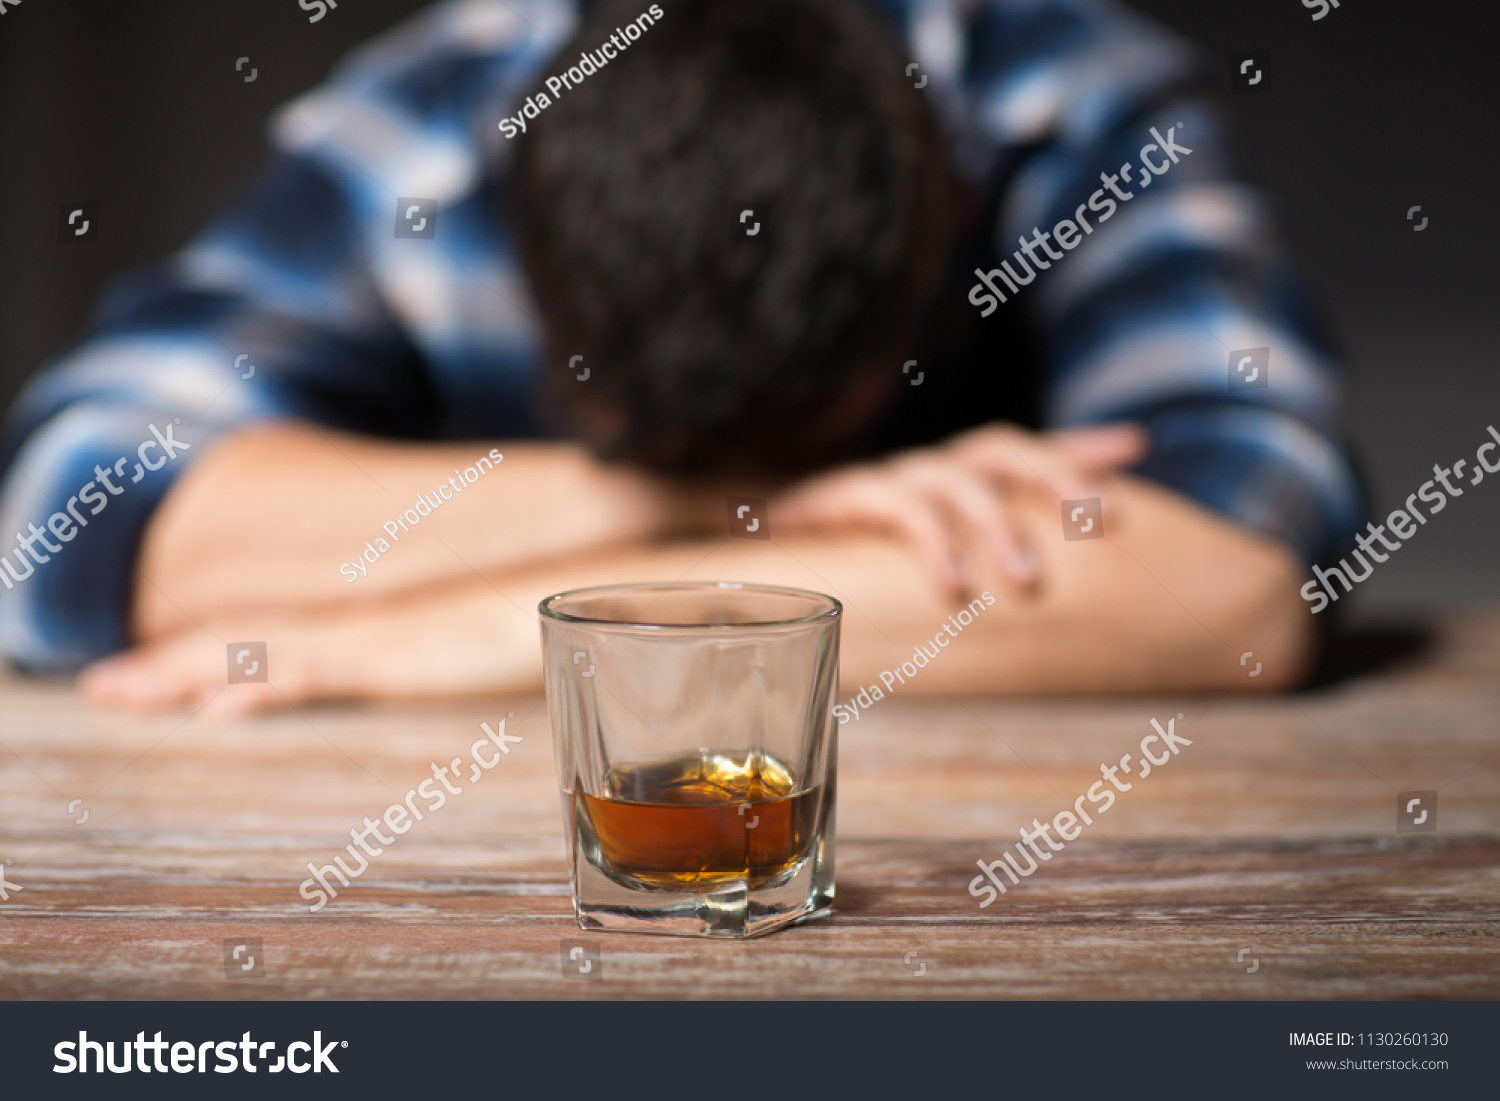 powerpoint-template-alcoholism-alcohol-addiction-and-people-iikhjnhikh